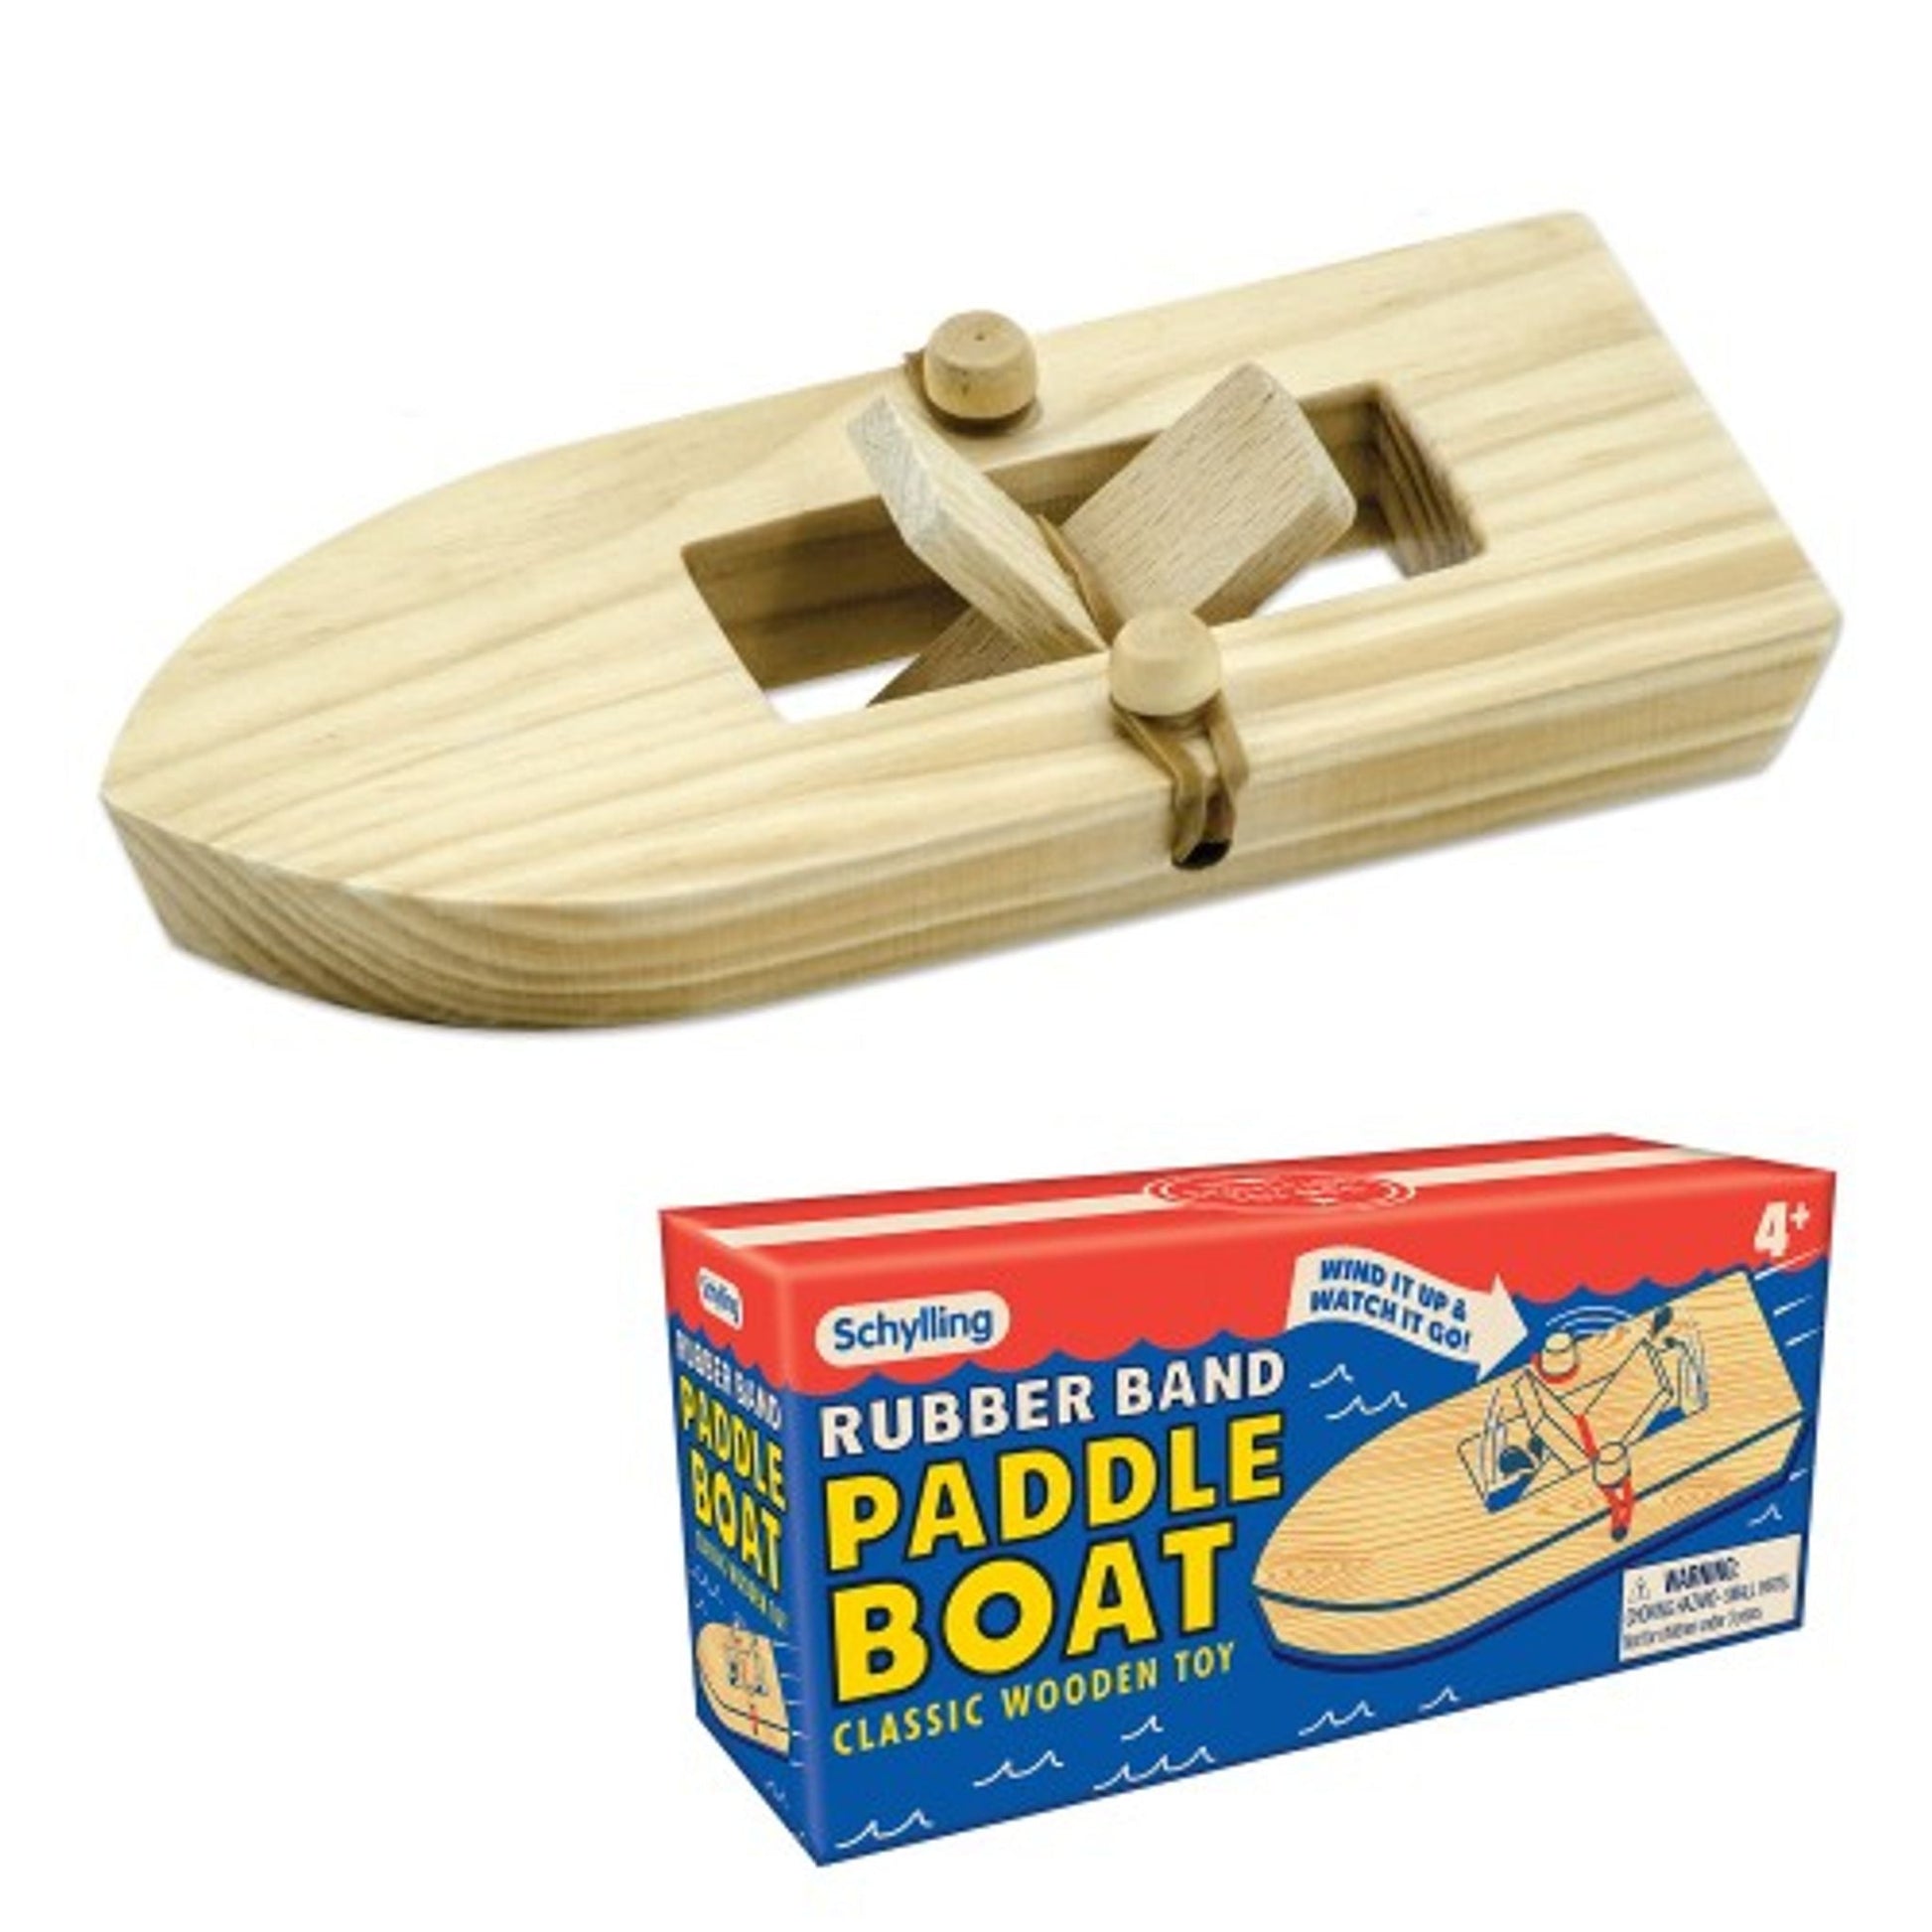 Schylling: Wooden Paddle Boat - Toybox Tales